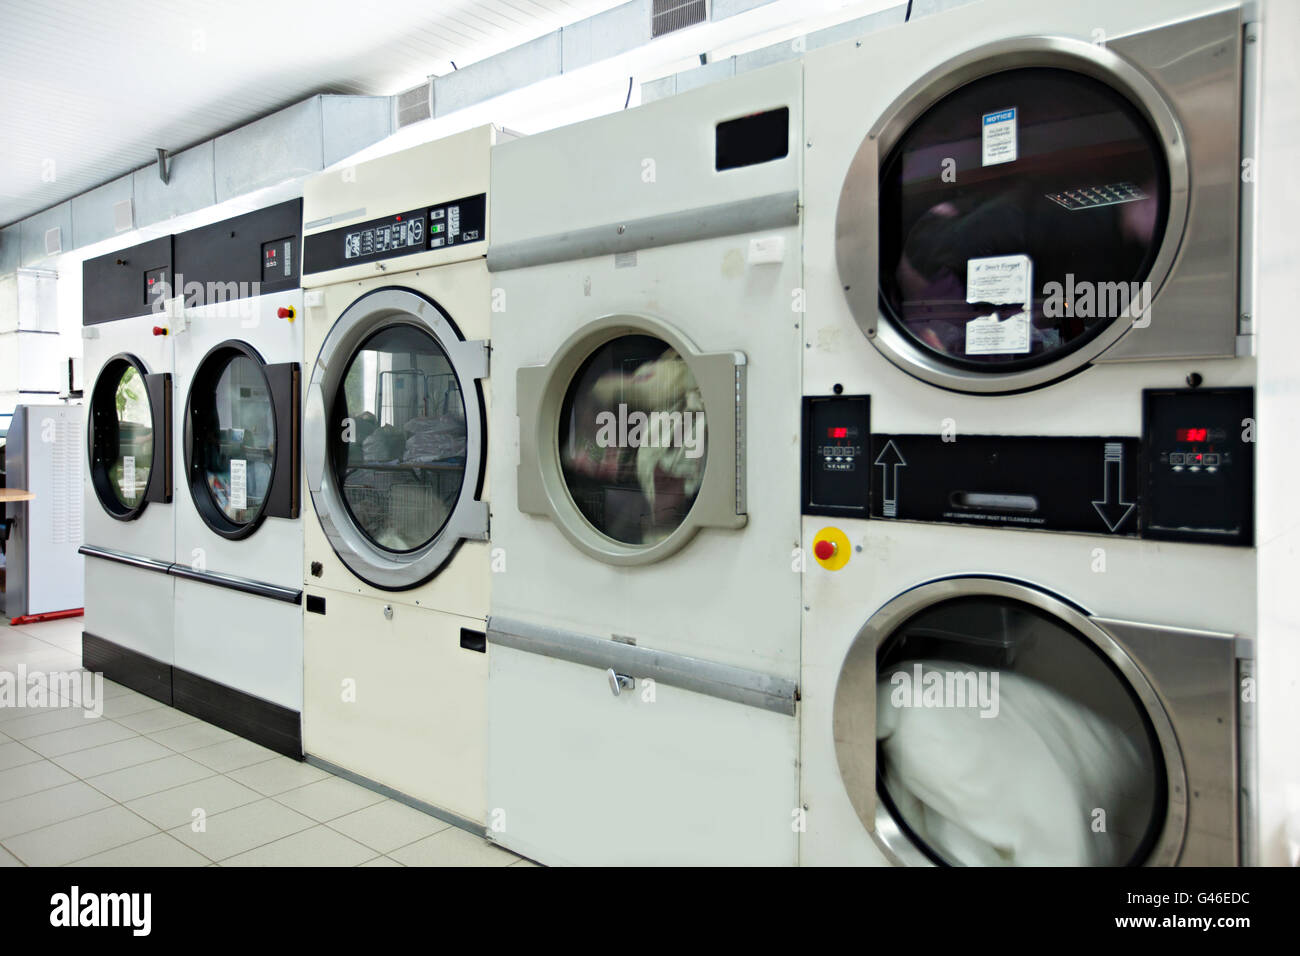 Automatic washing machines in laundrette Stock Photo